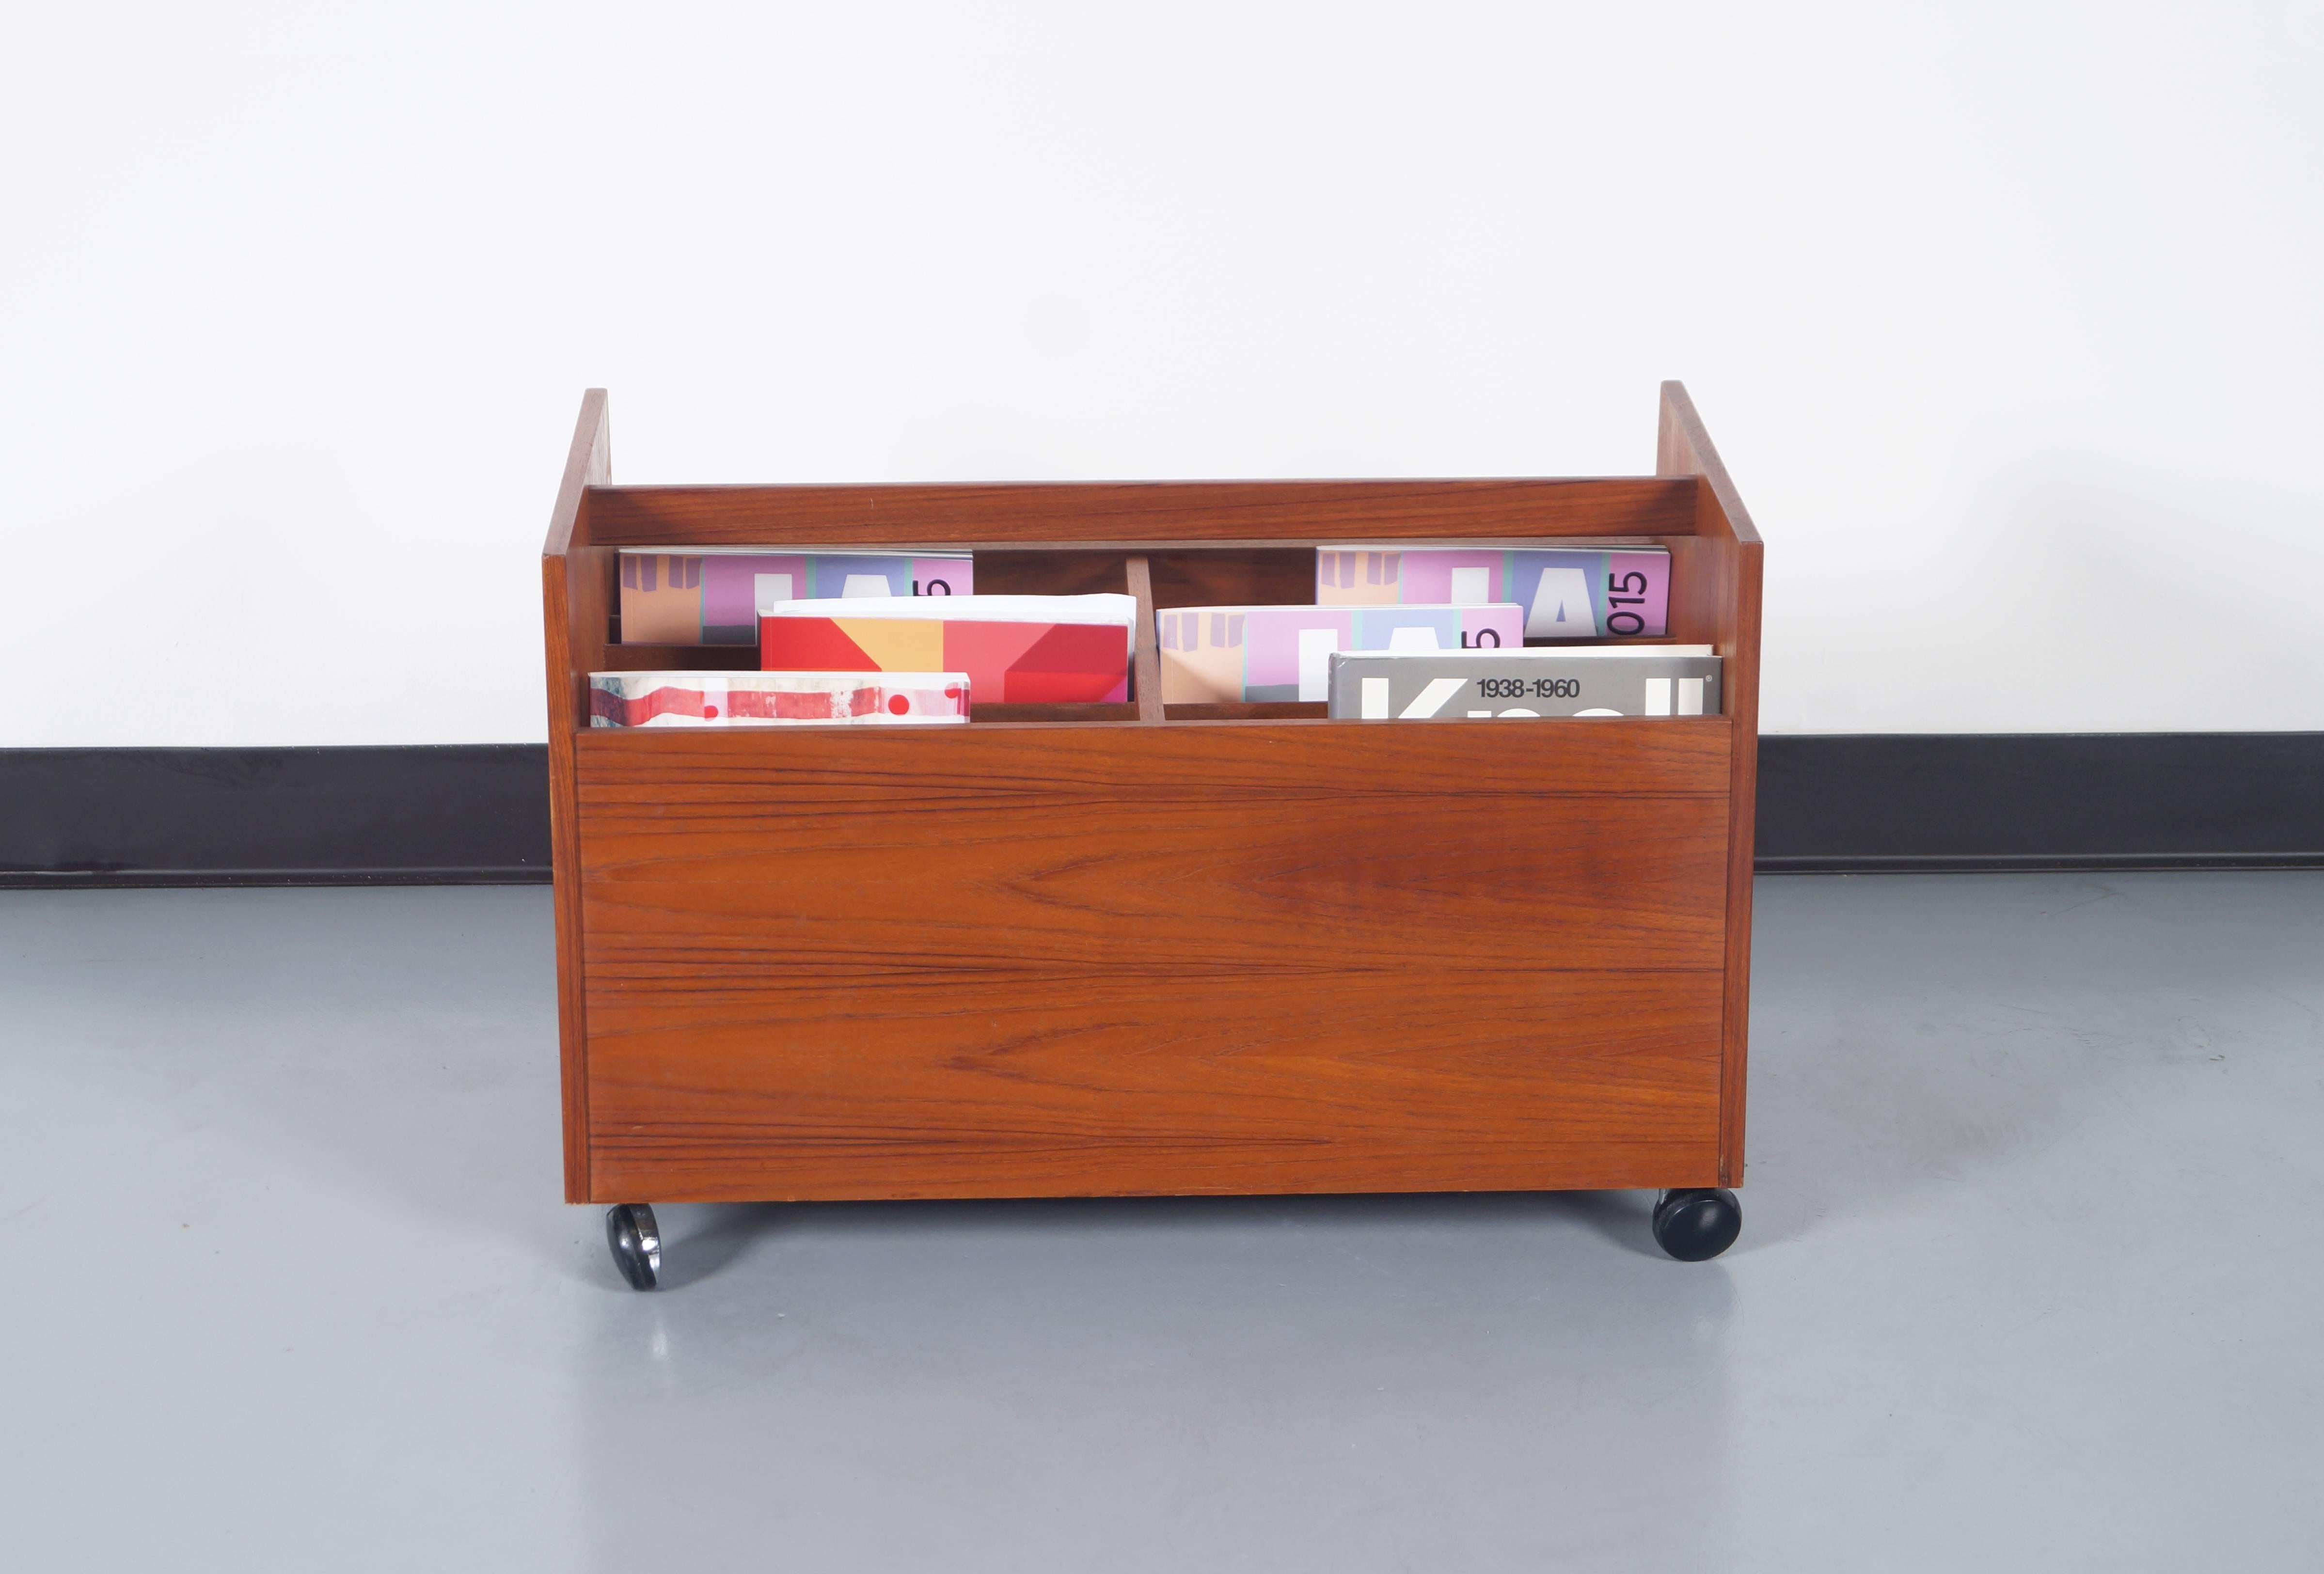 Fabulous vintage teak rolling magazine or record stand designed by Rolf Hesland for Bruskbo in Norway, circa 1960s. Features a trapezoid-shaped design in which you can appreciate the fine grains of teak throughout the entire structure of the piece.